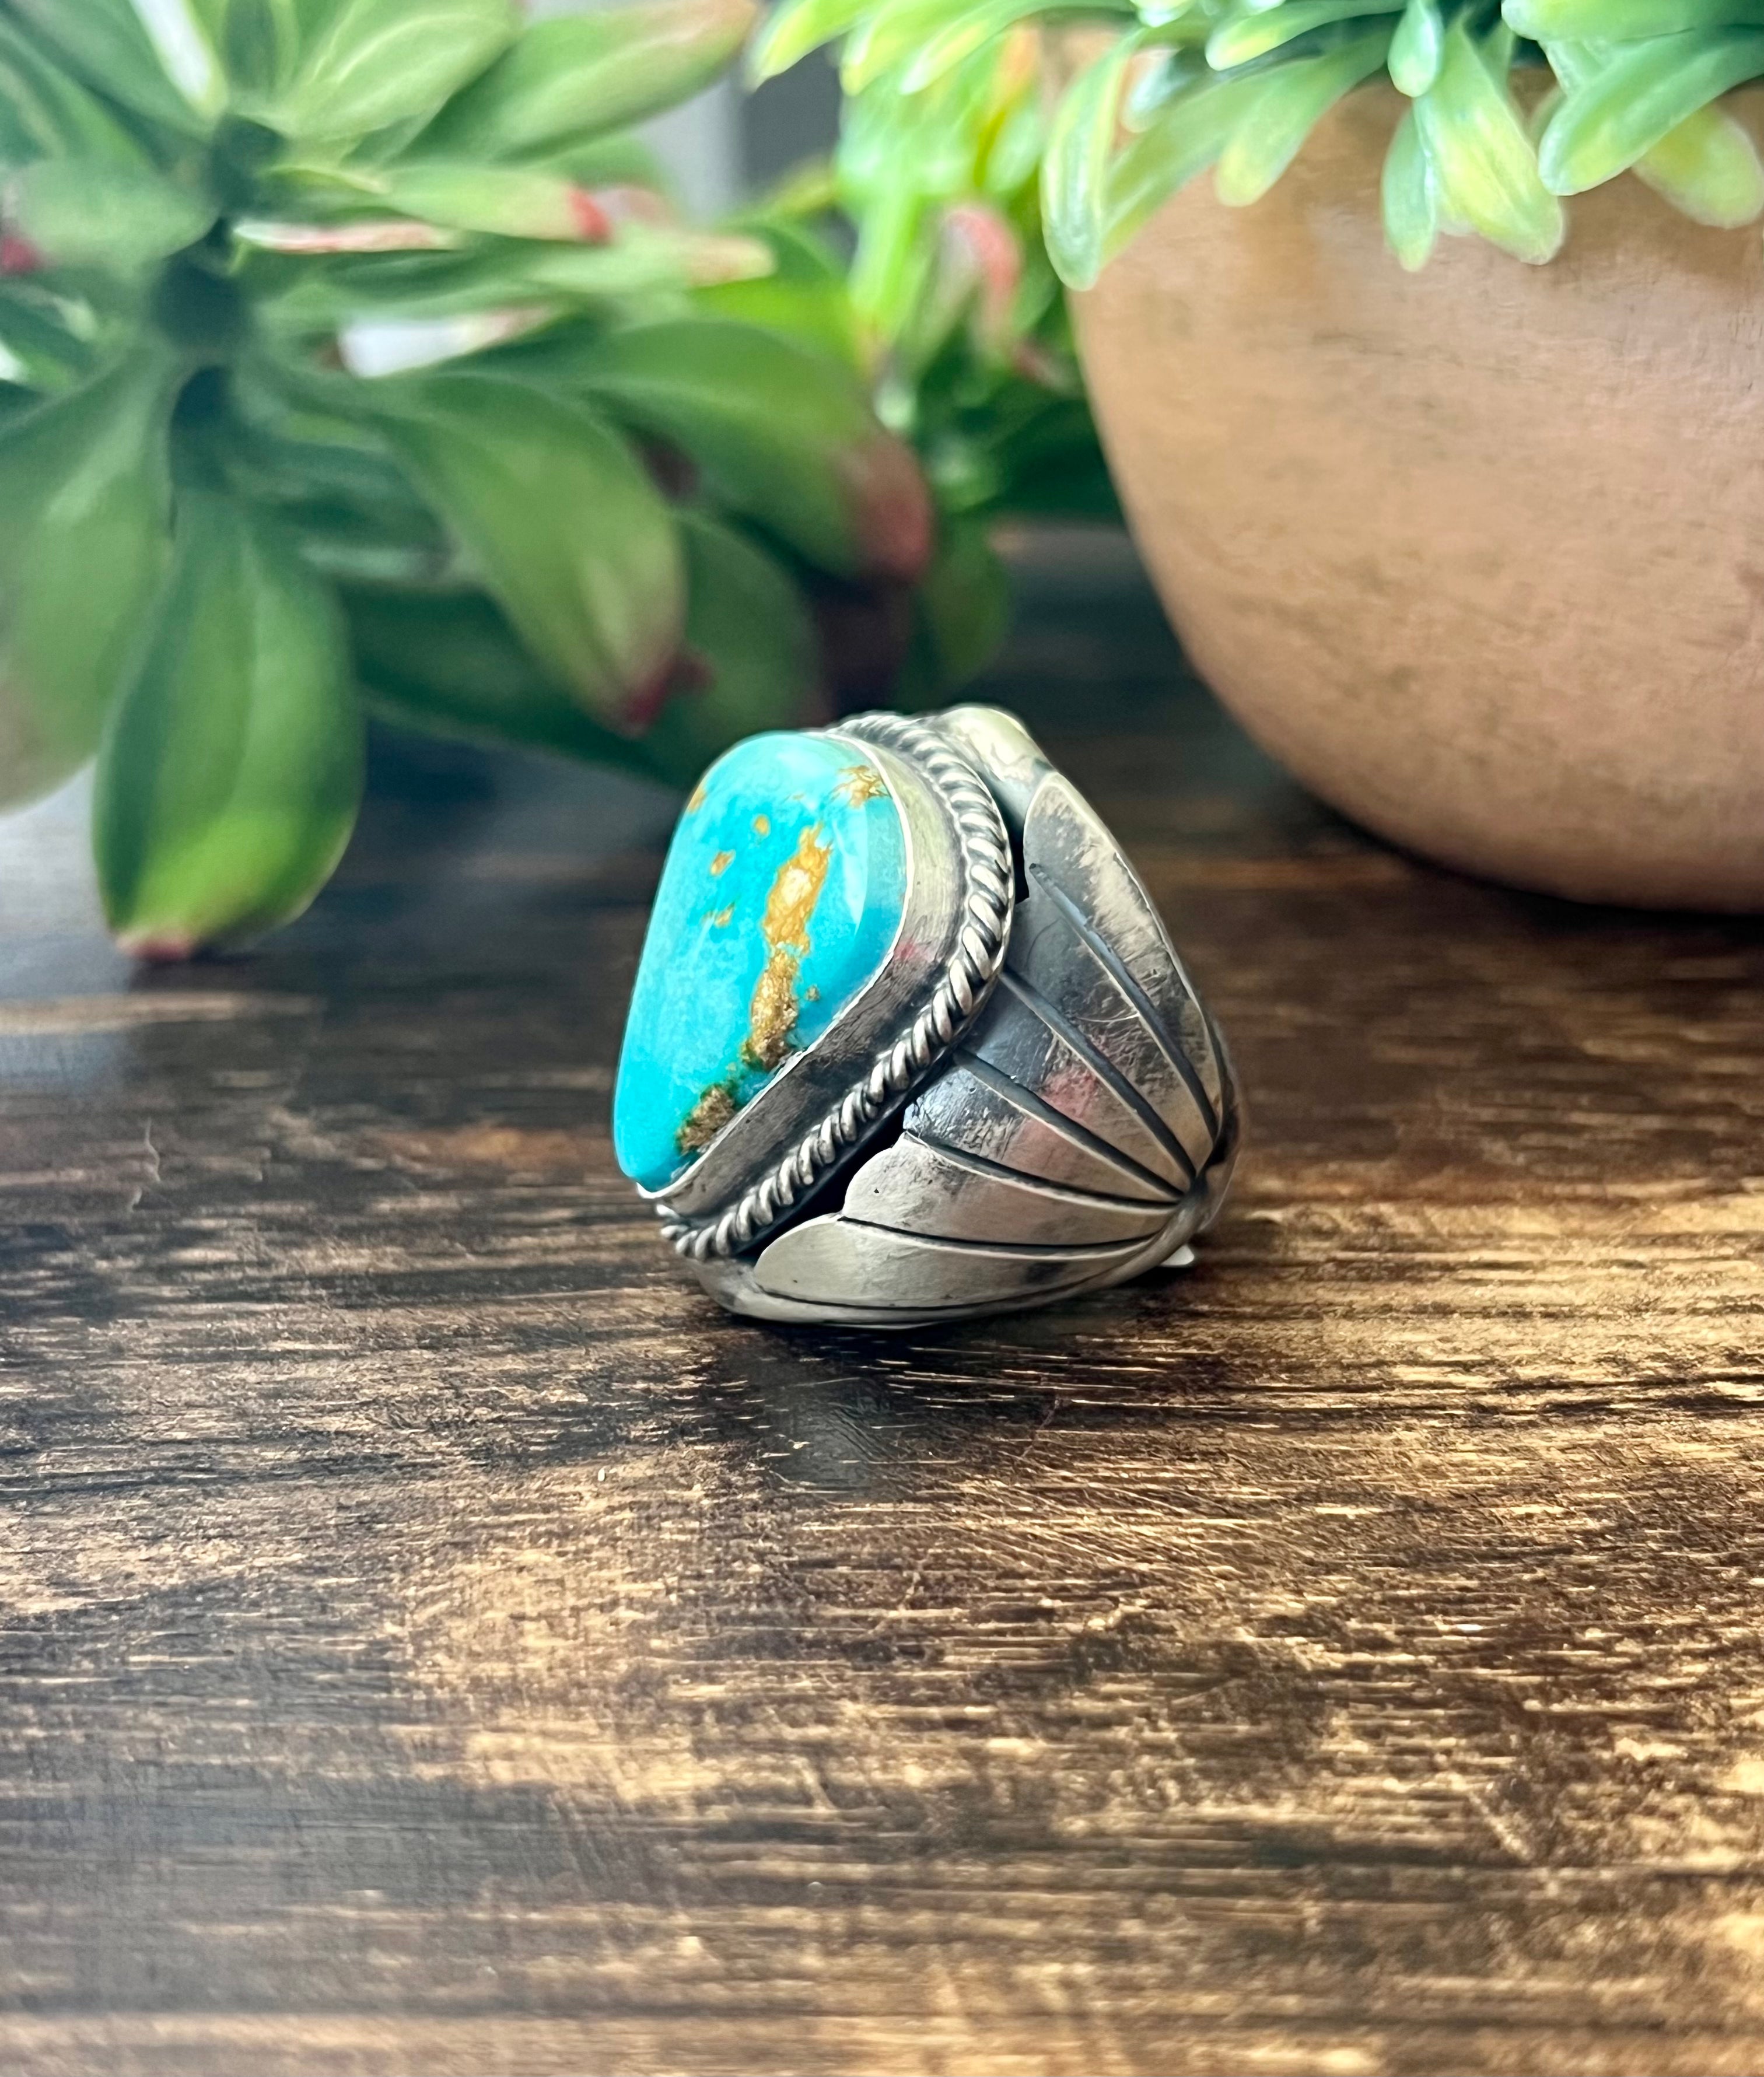 Tony Yazzie Sonoran Mountain Turquoise & Sterling Silver Ring Size 10.5